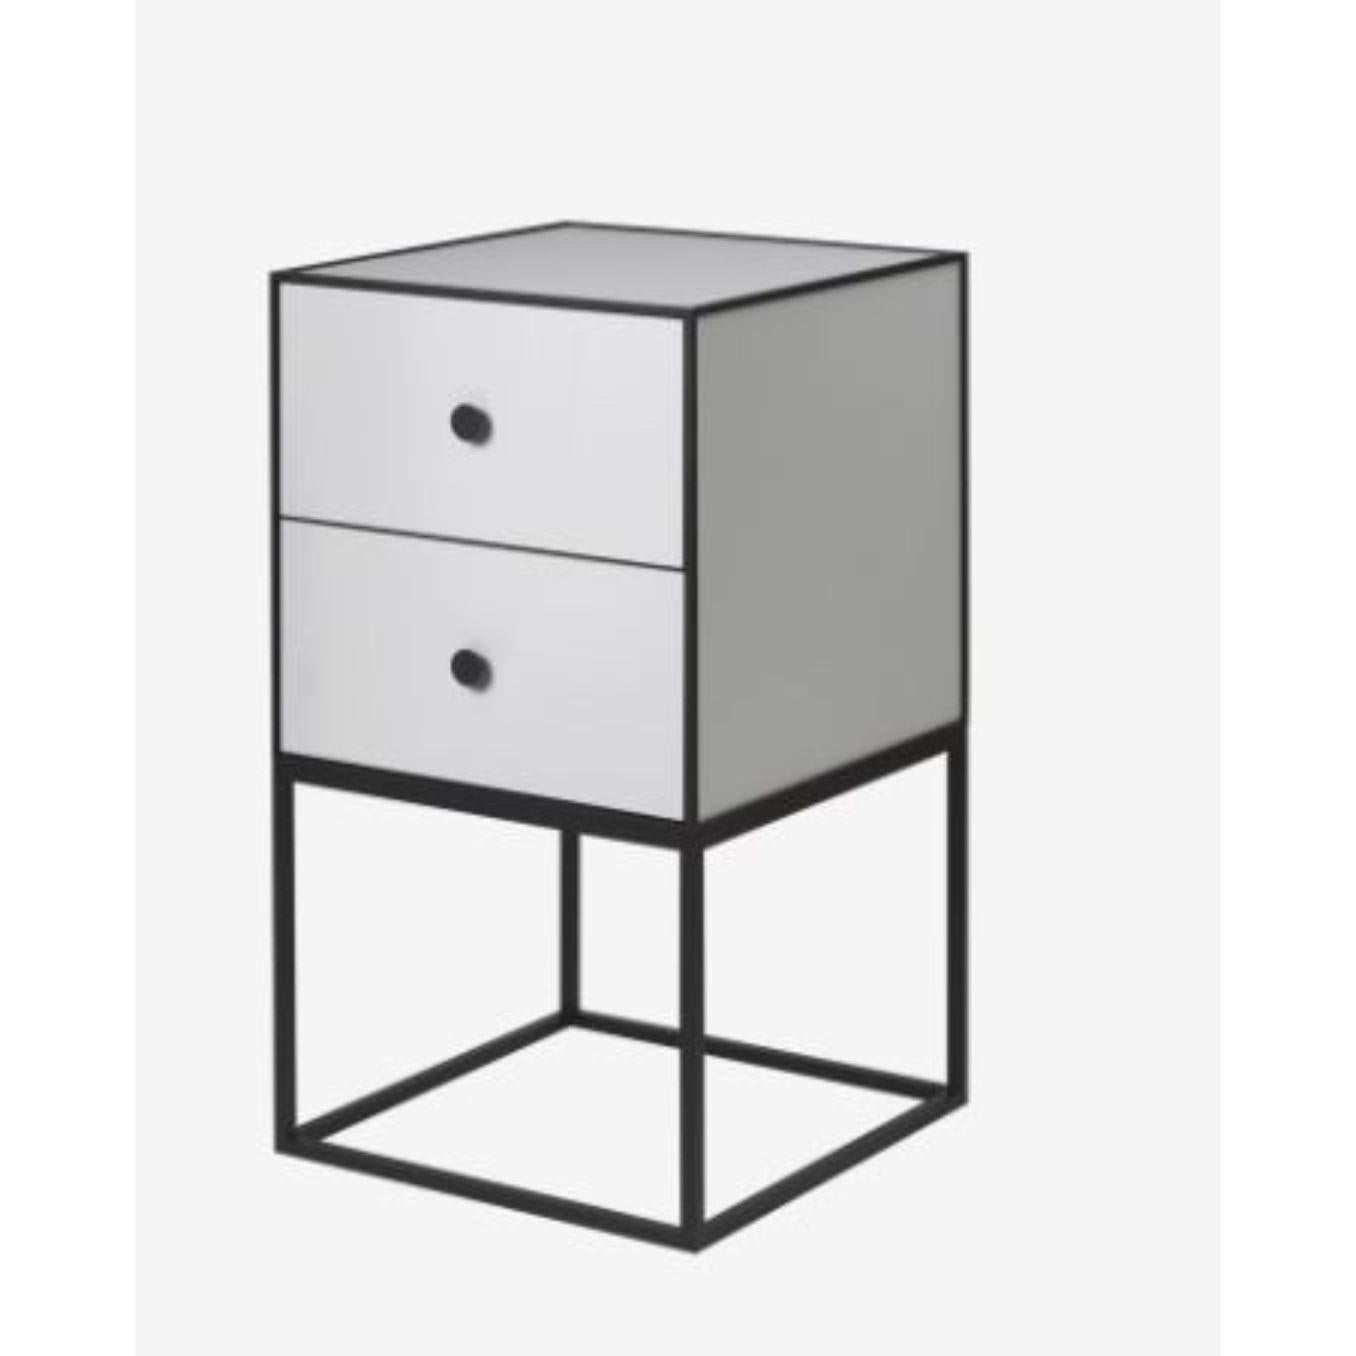 35 light grey frame sideboard with 2 drawers by Lassen
Dimensions: D 35 x W 35 x H 63 cm 
Materials: finér, melamin, melamine, metal, veneer
Also available in different colors and dimensions. 
Weight: 15.50 Kg

By Lassen is a Danish design